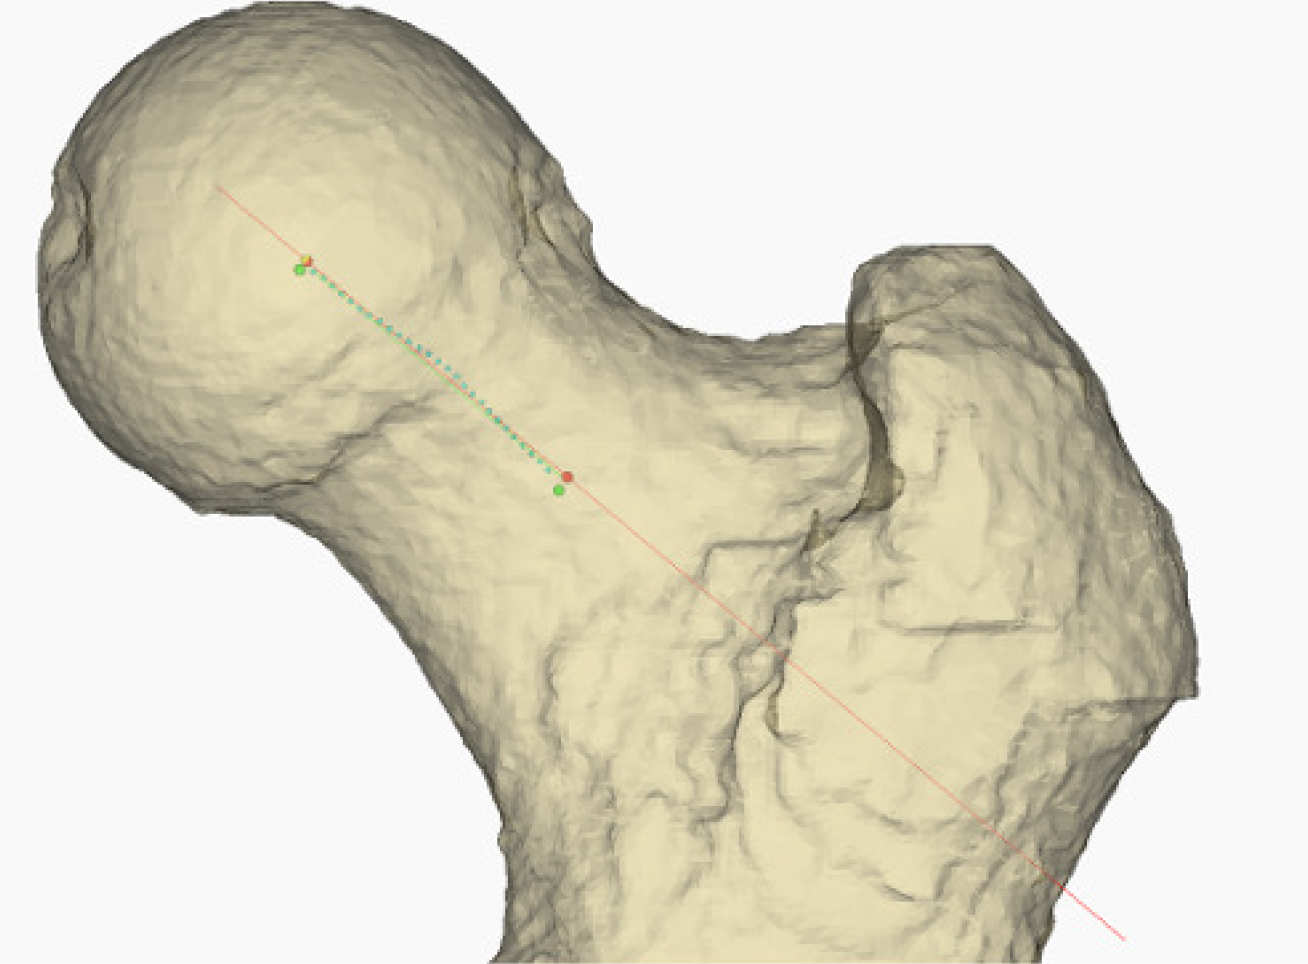 Femoral head model with superimposed axes